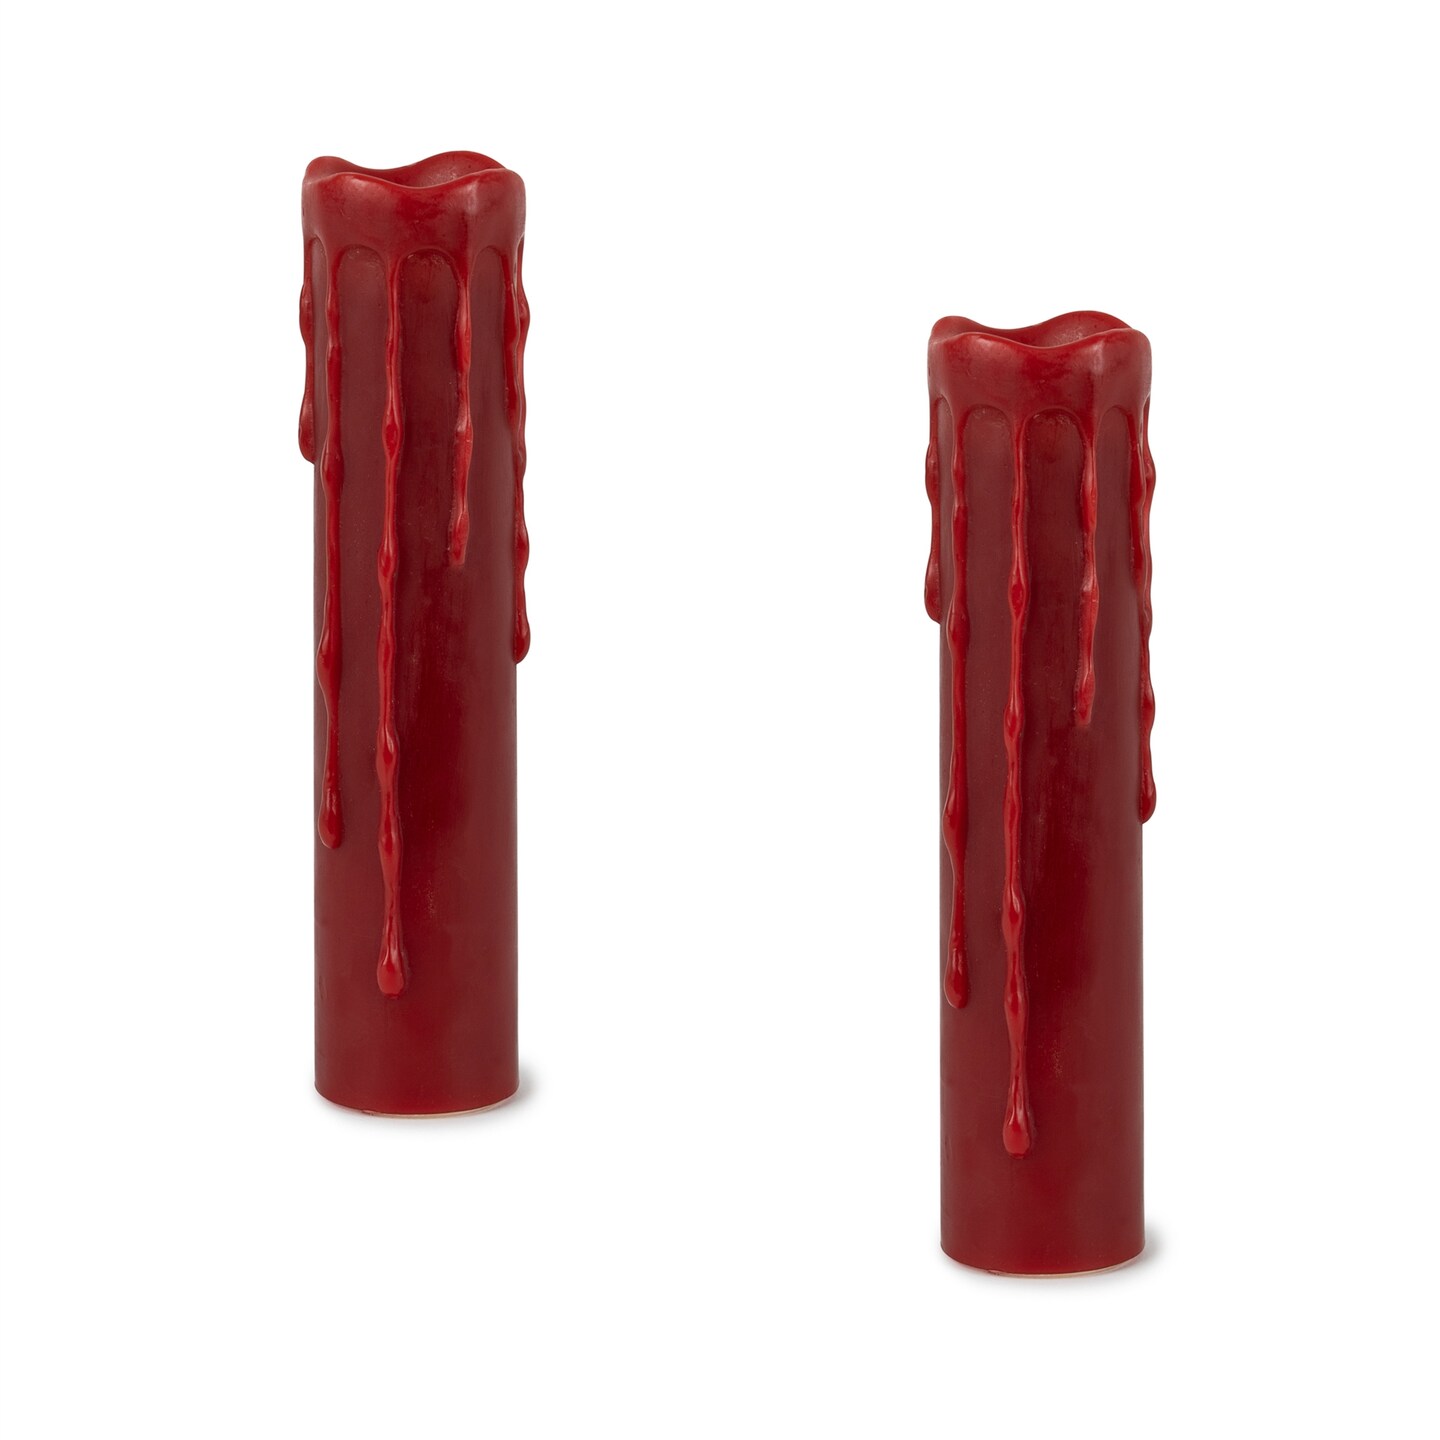 LED Wax Dripping Pillar Candle w/ remote (Set of 2)